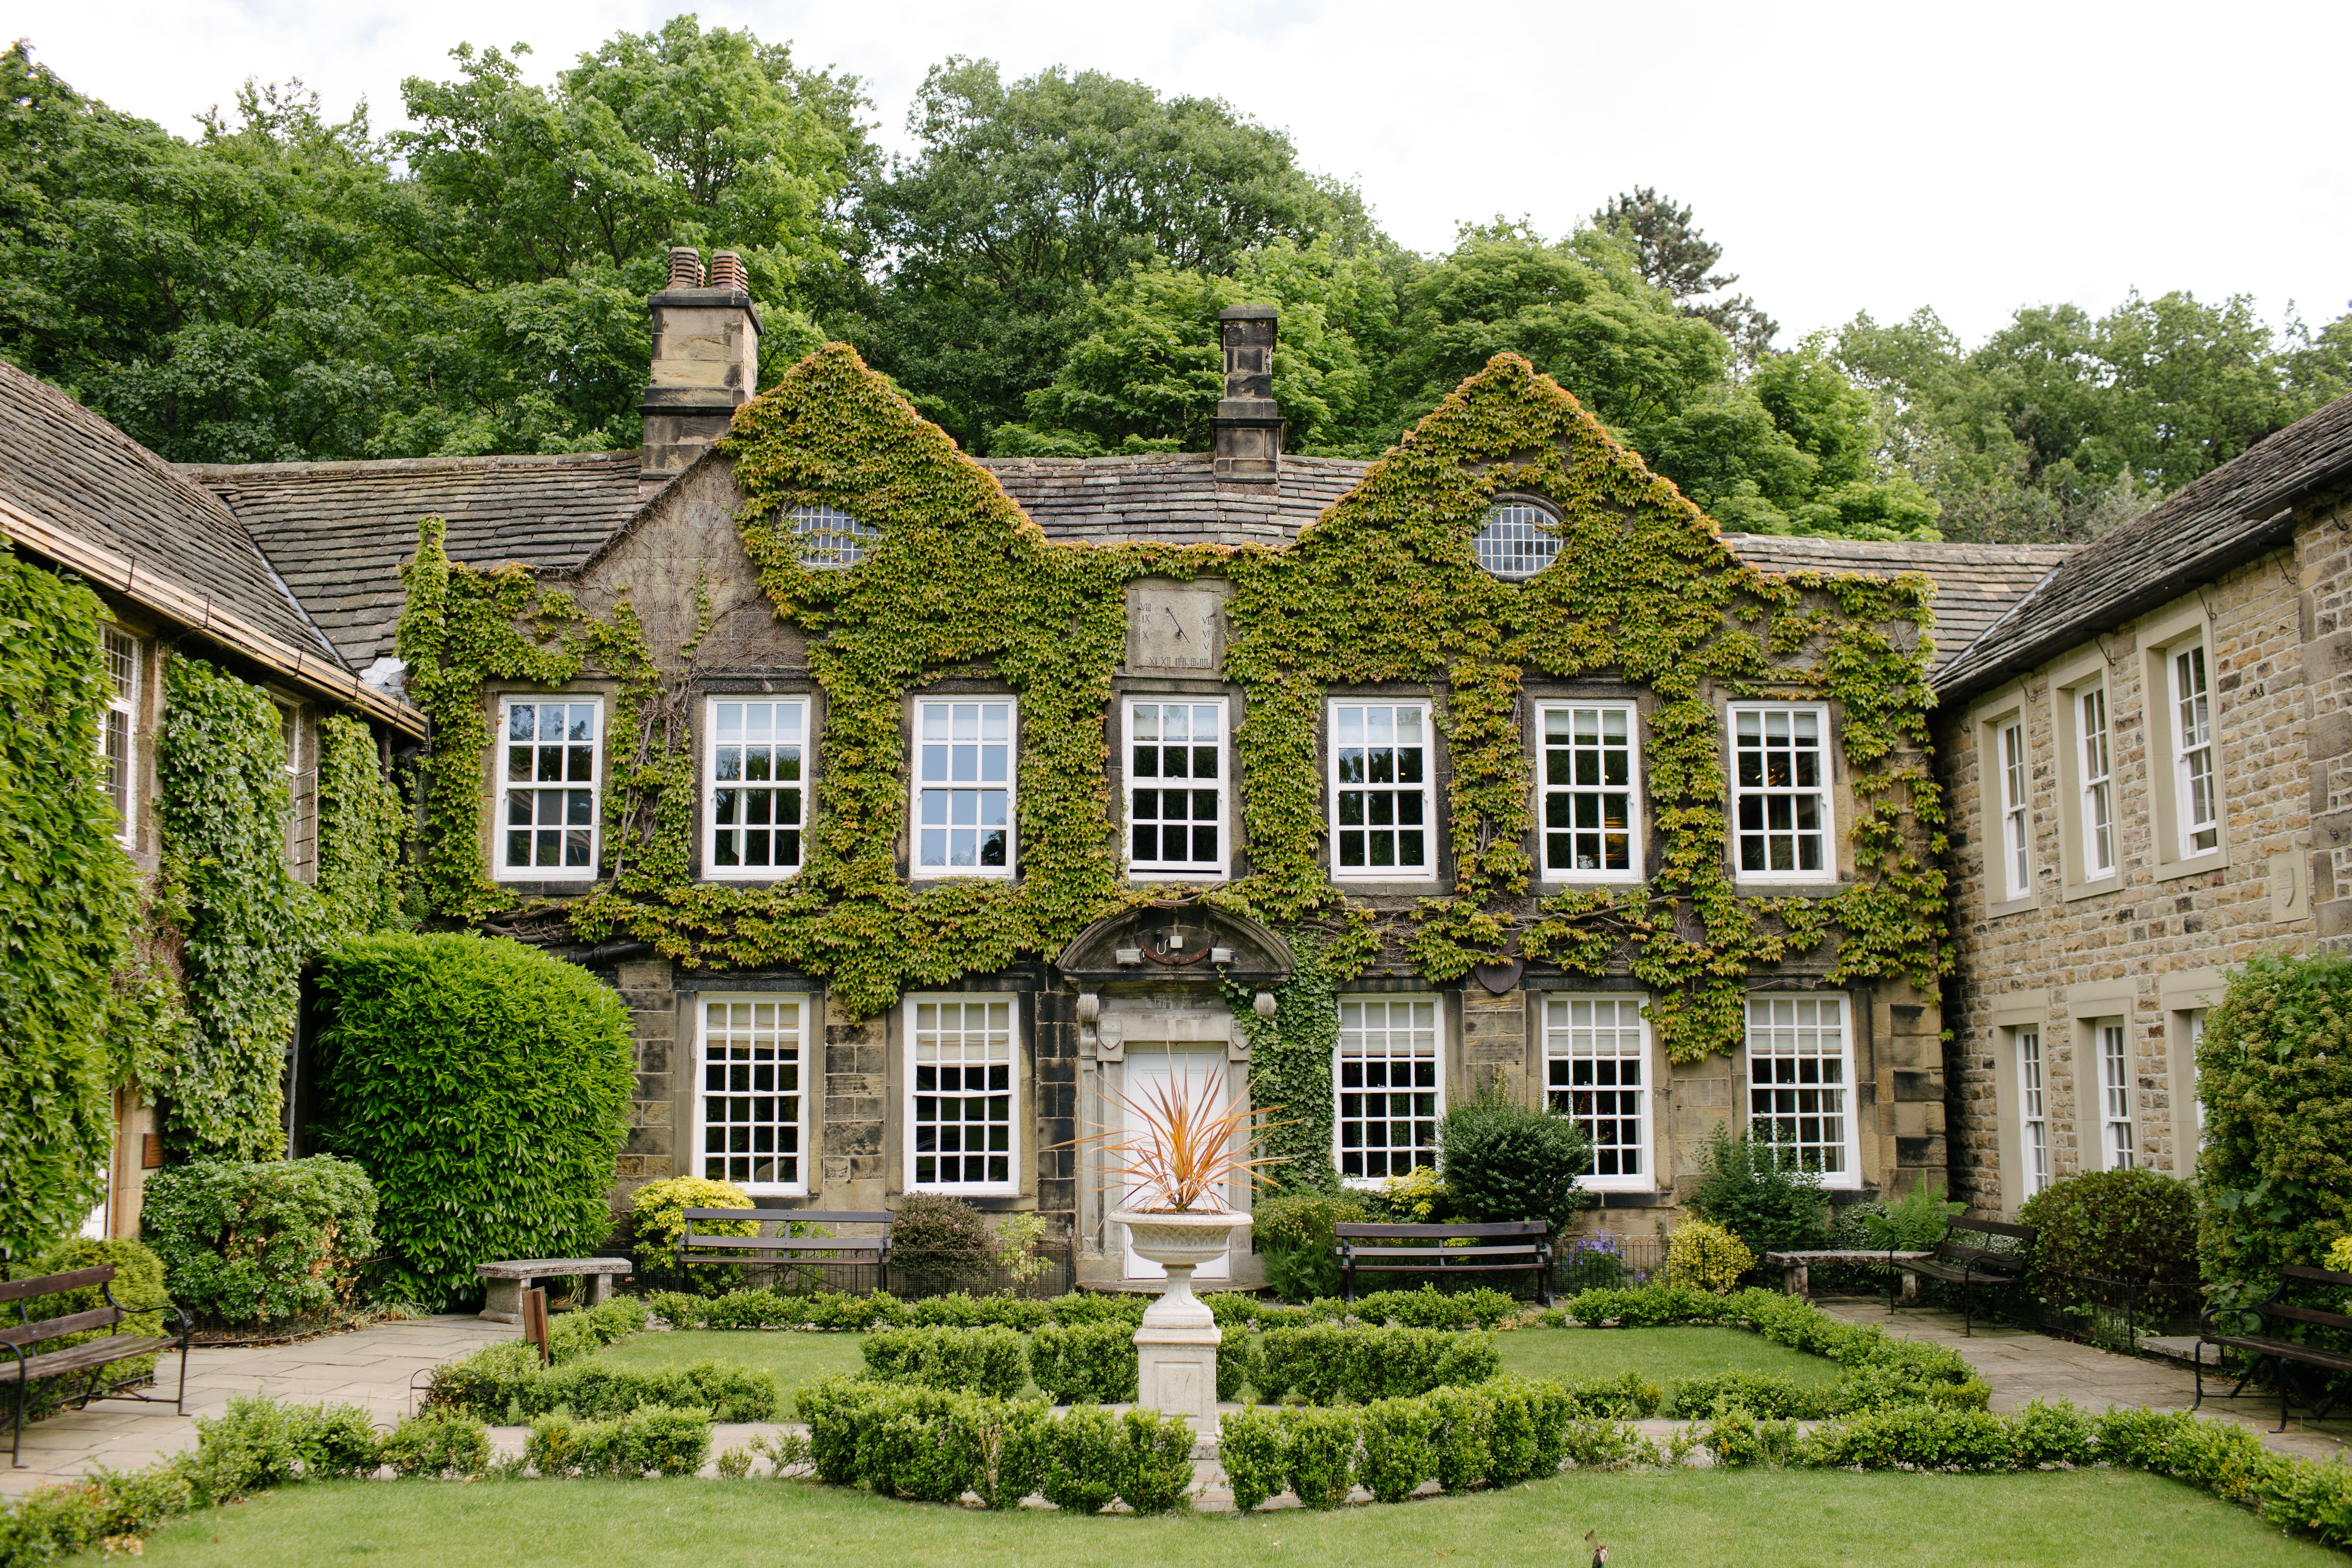 Picture of an English house